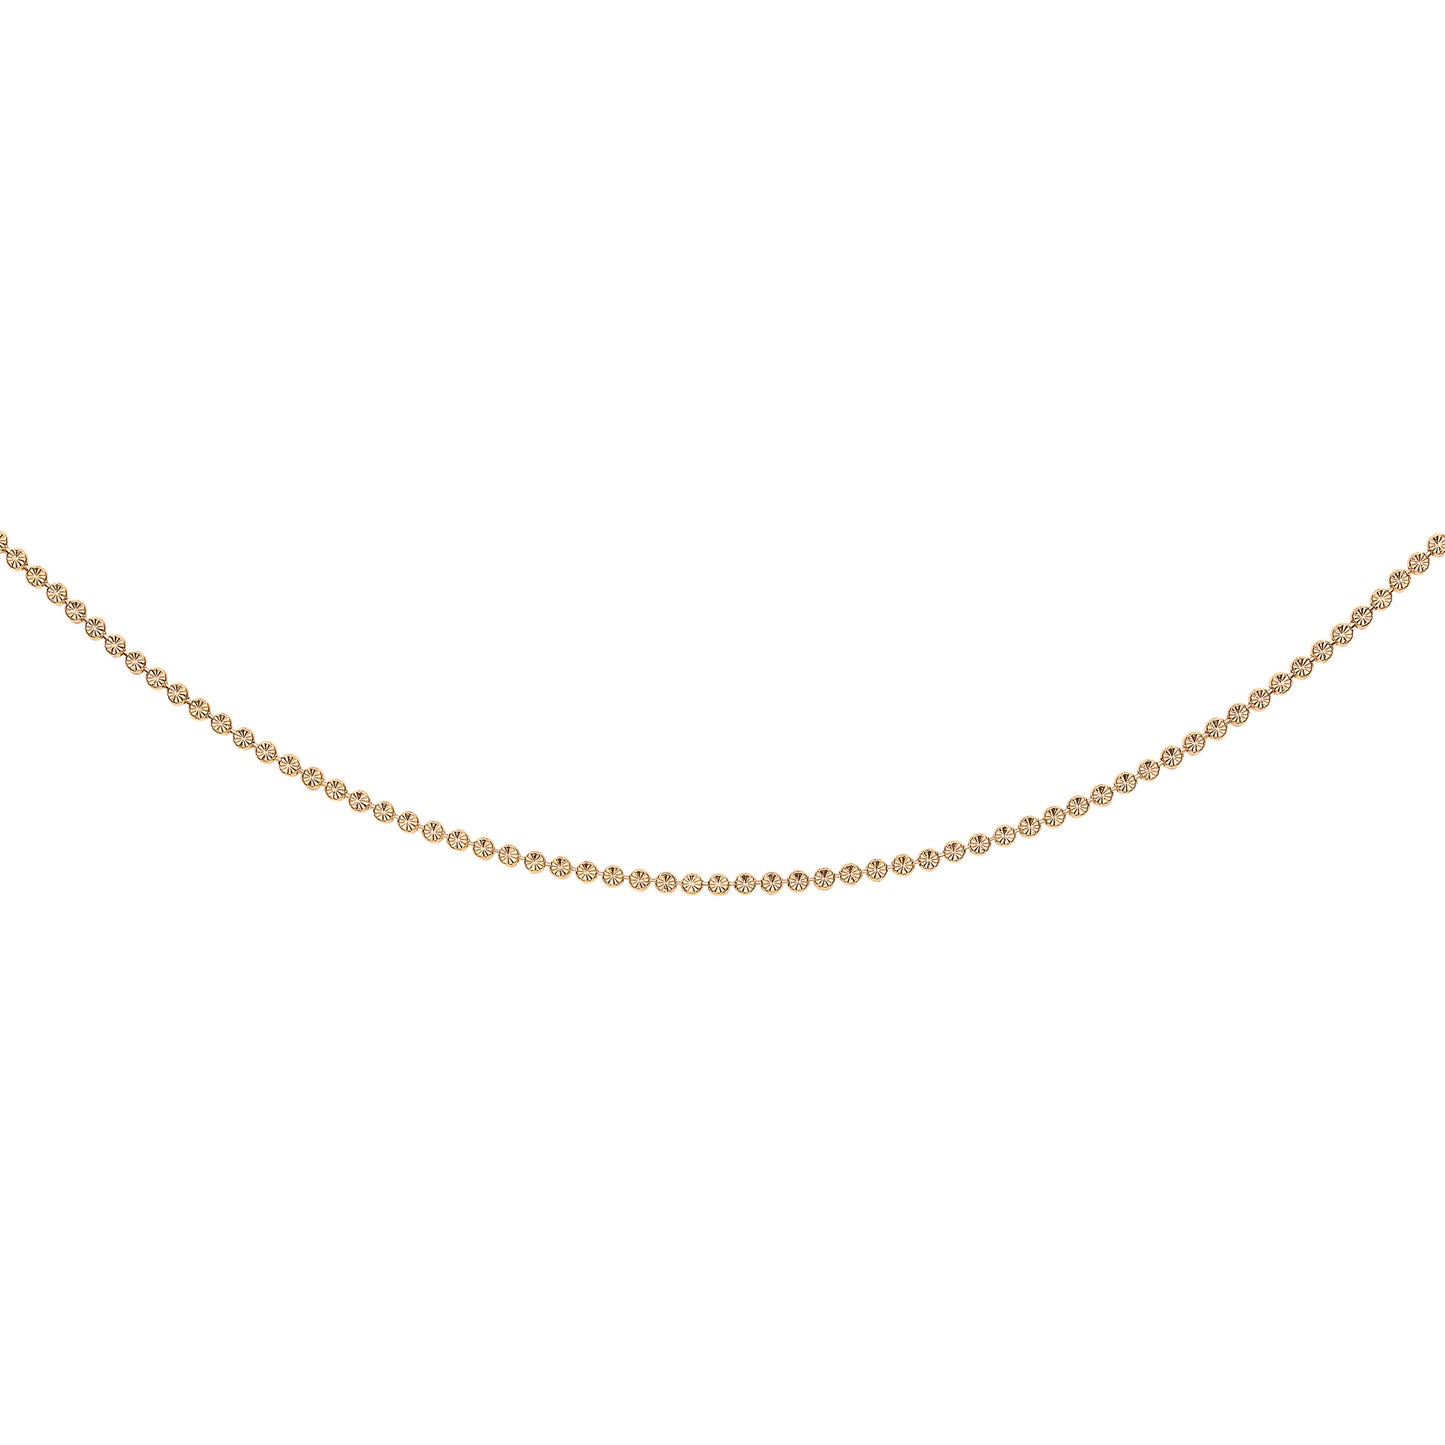 Gilded Silver  Flat Bead Necklace 3mm 18" + 2" Extension - CH-DC03